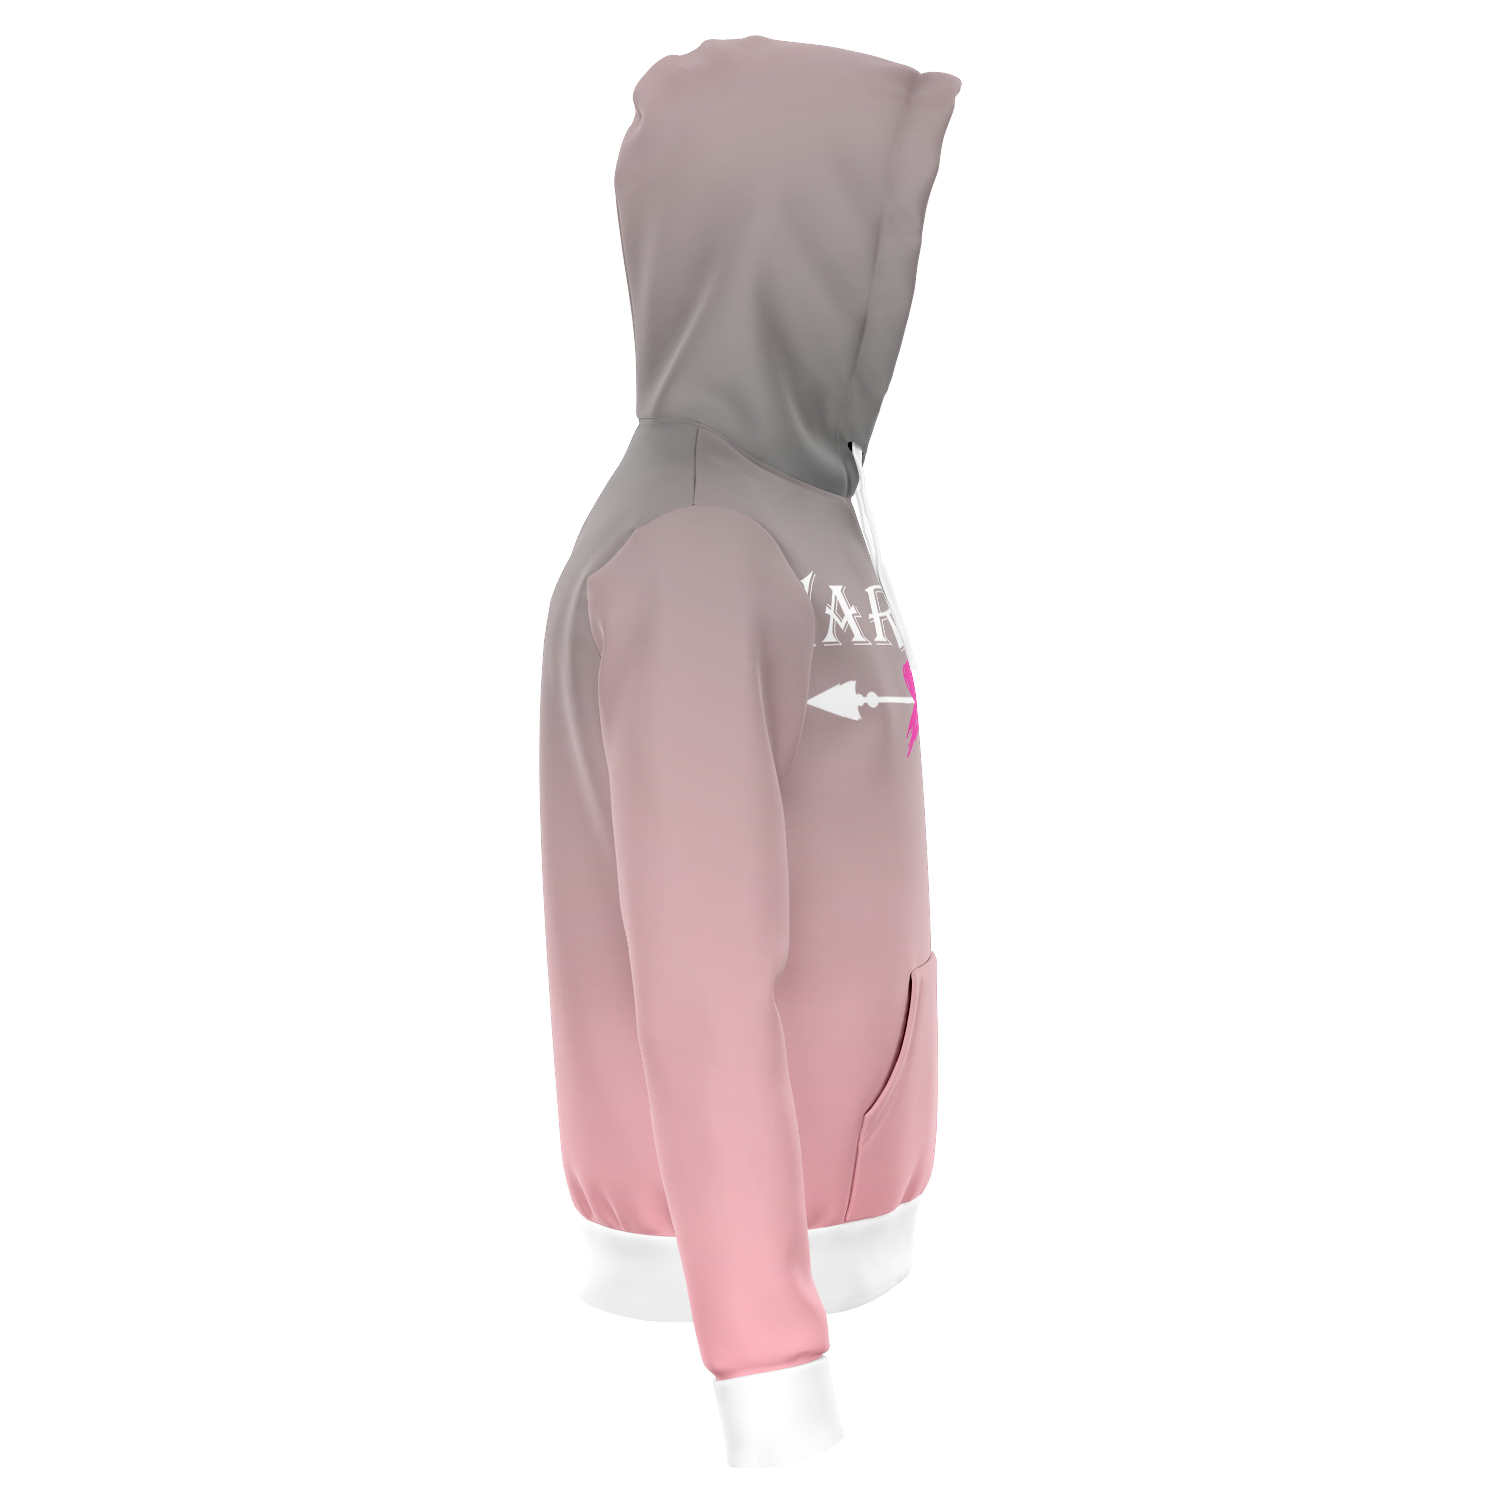 Breast Cancer Awareness Warrior Hoodie - - Loyalty Vibes